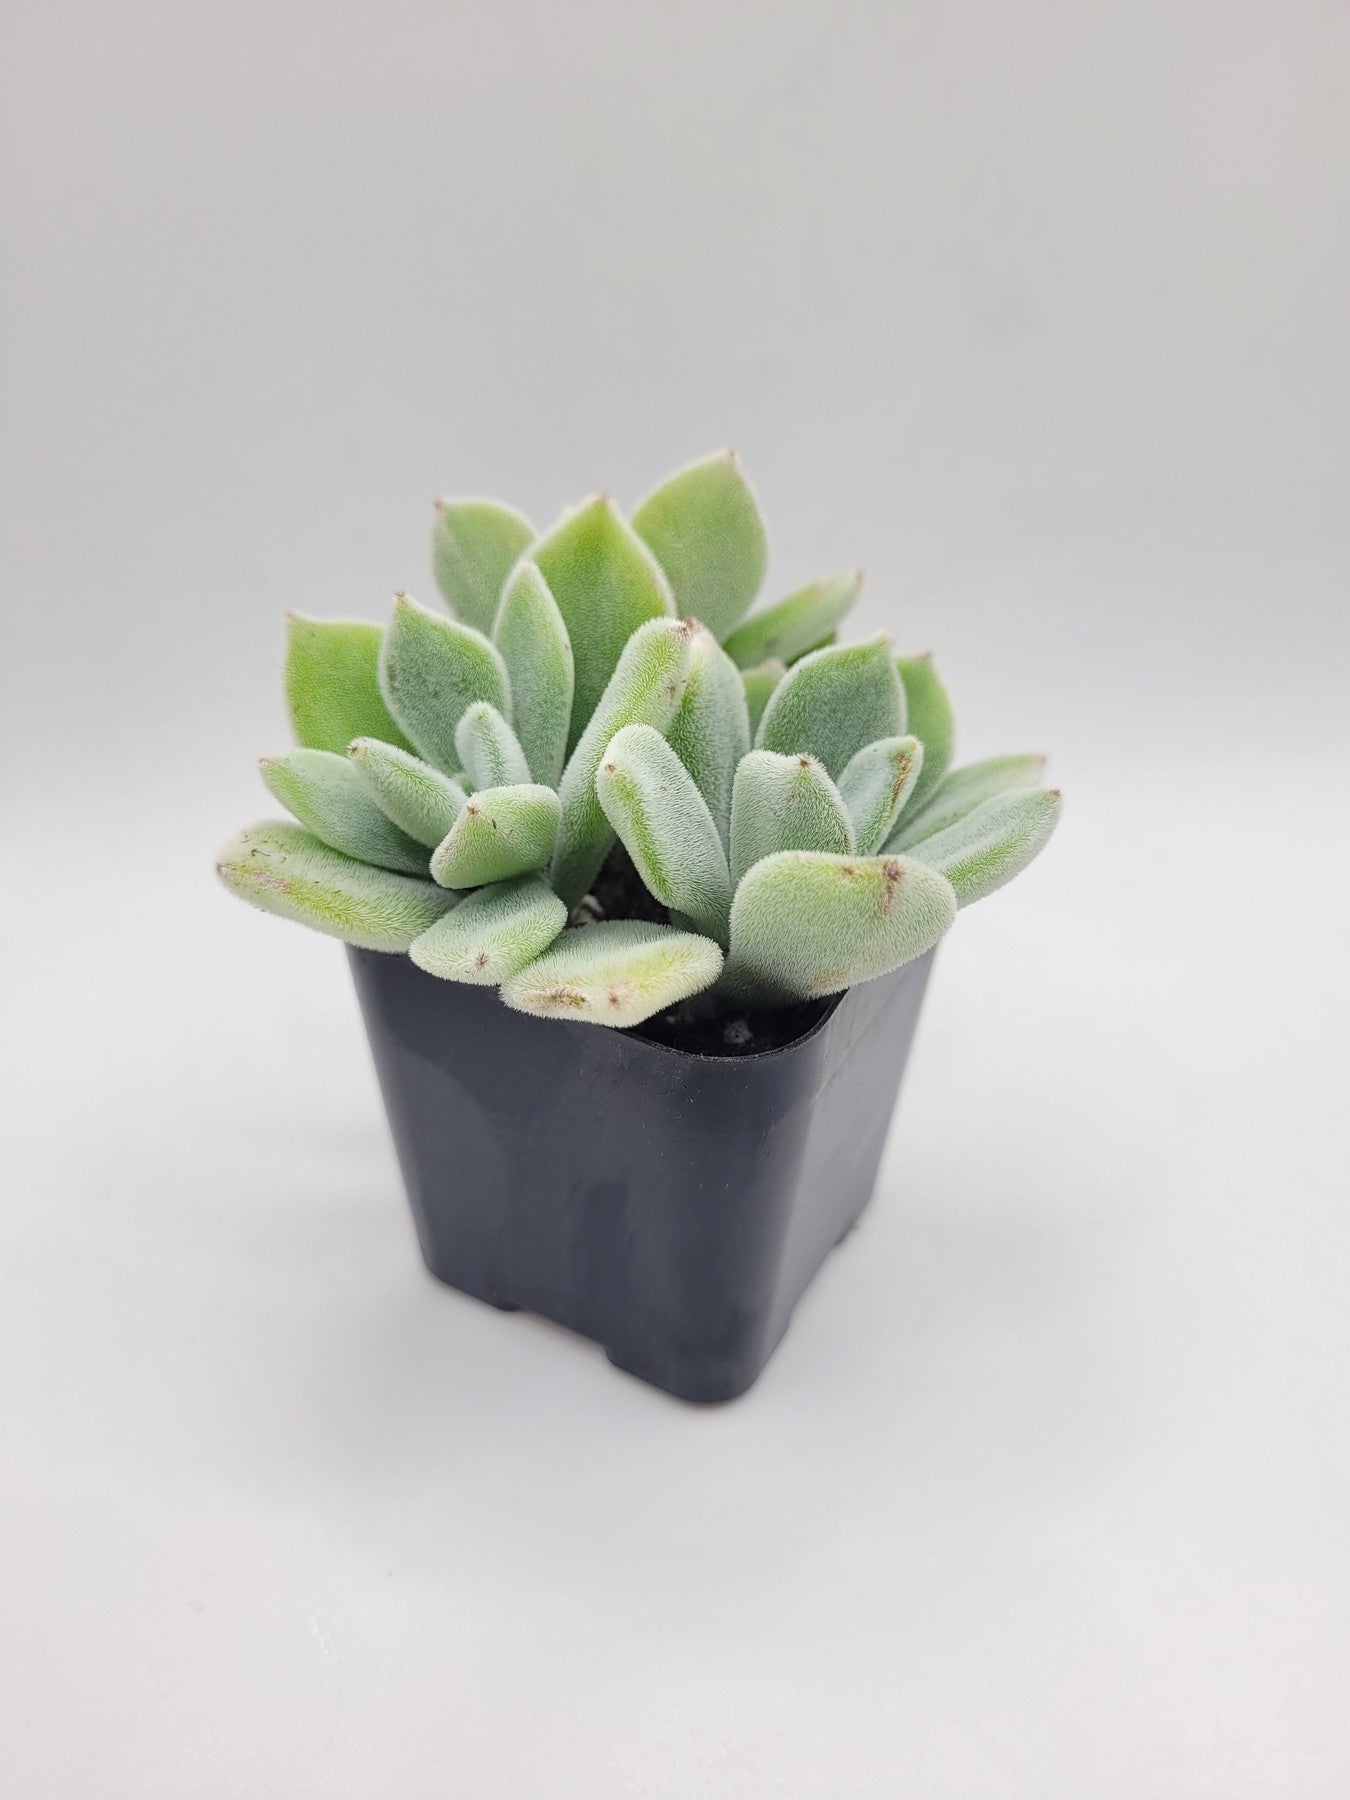 #53 Echeveria Pulvinata "Frosty"-Succulent - Small - Exact 2in Type-The Succulent Source